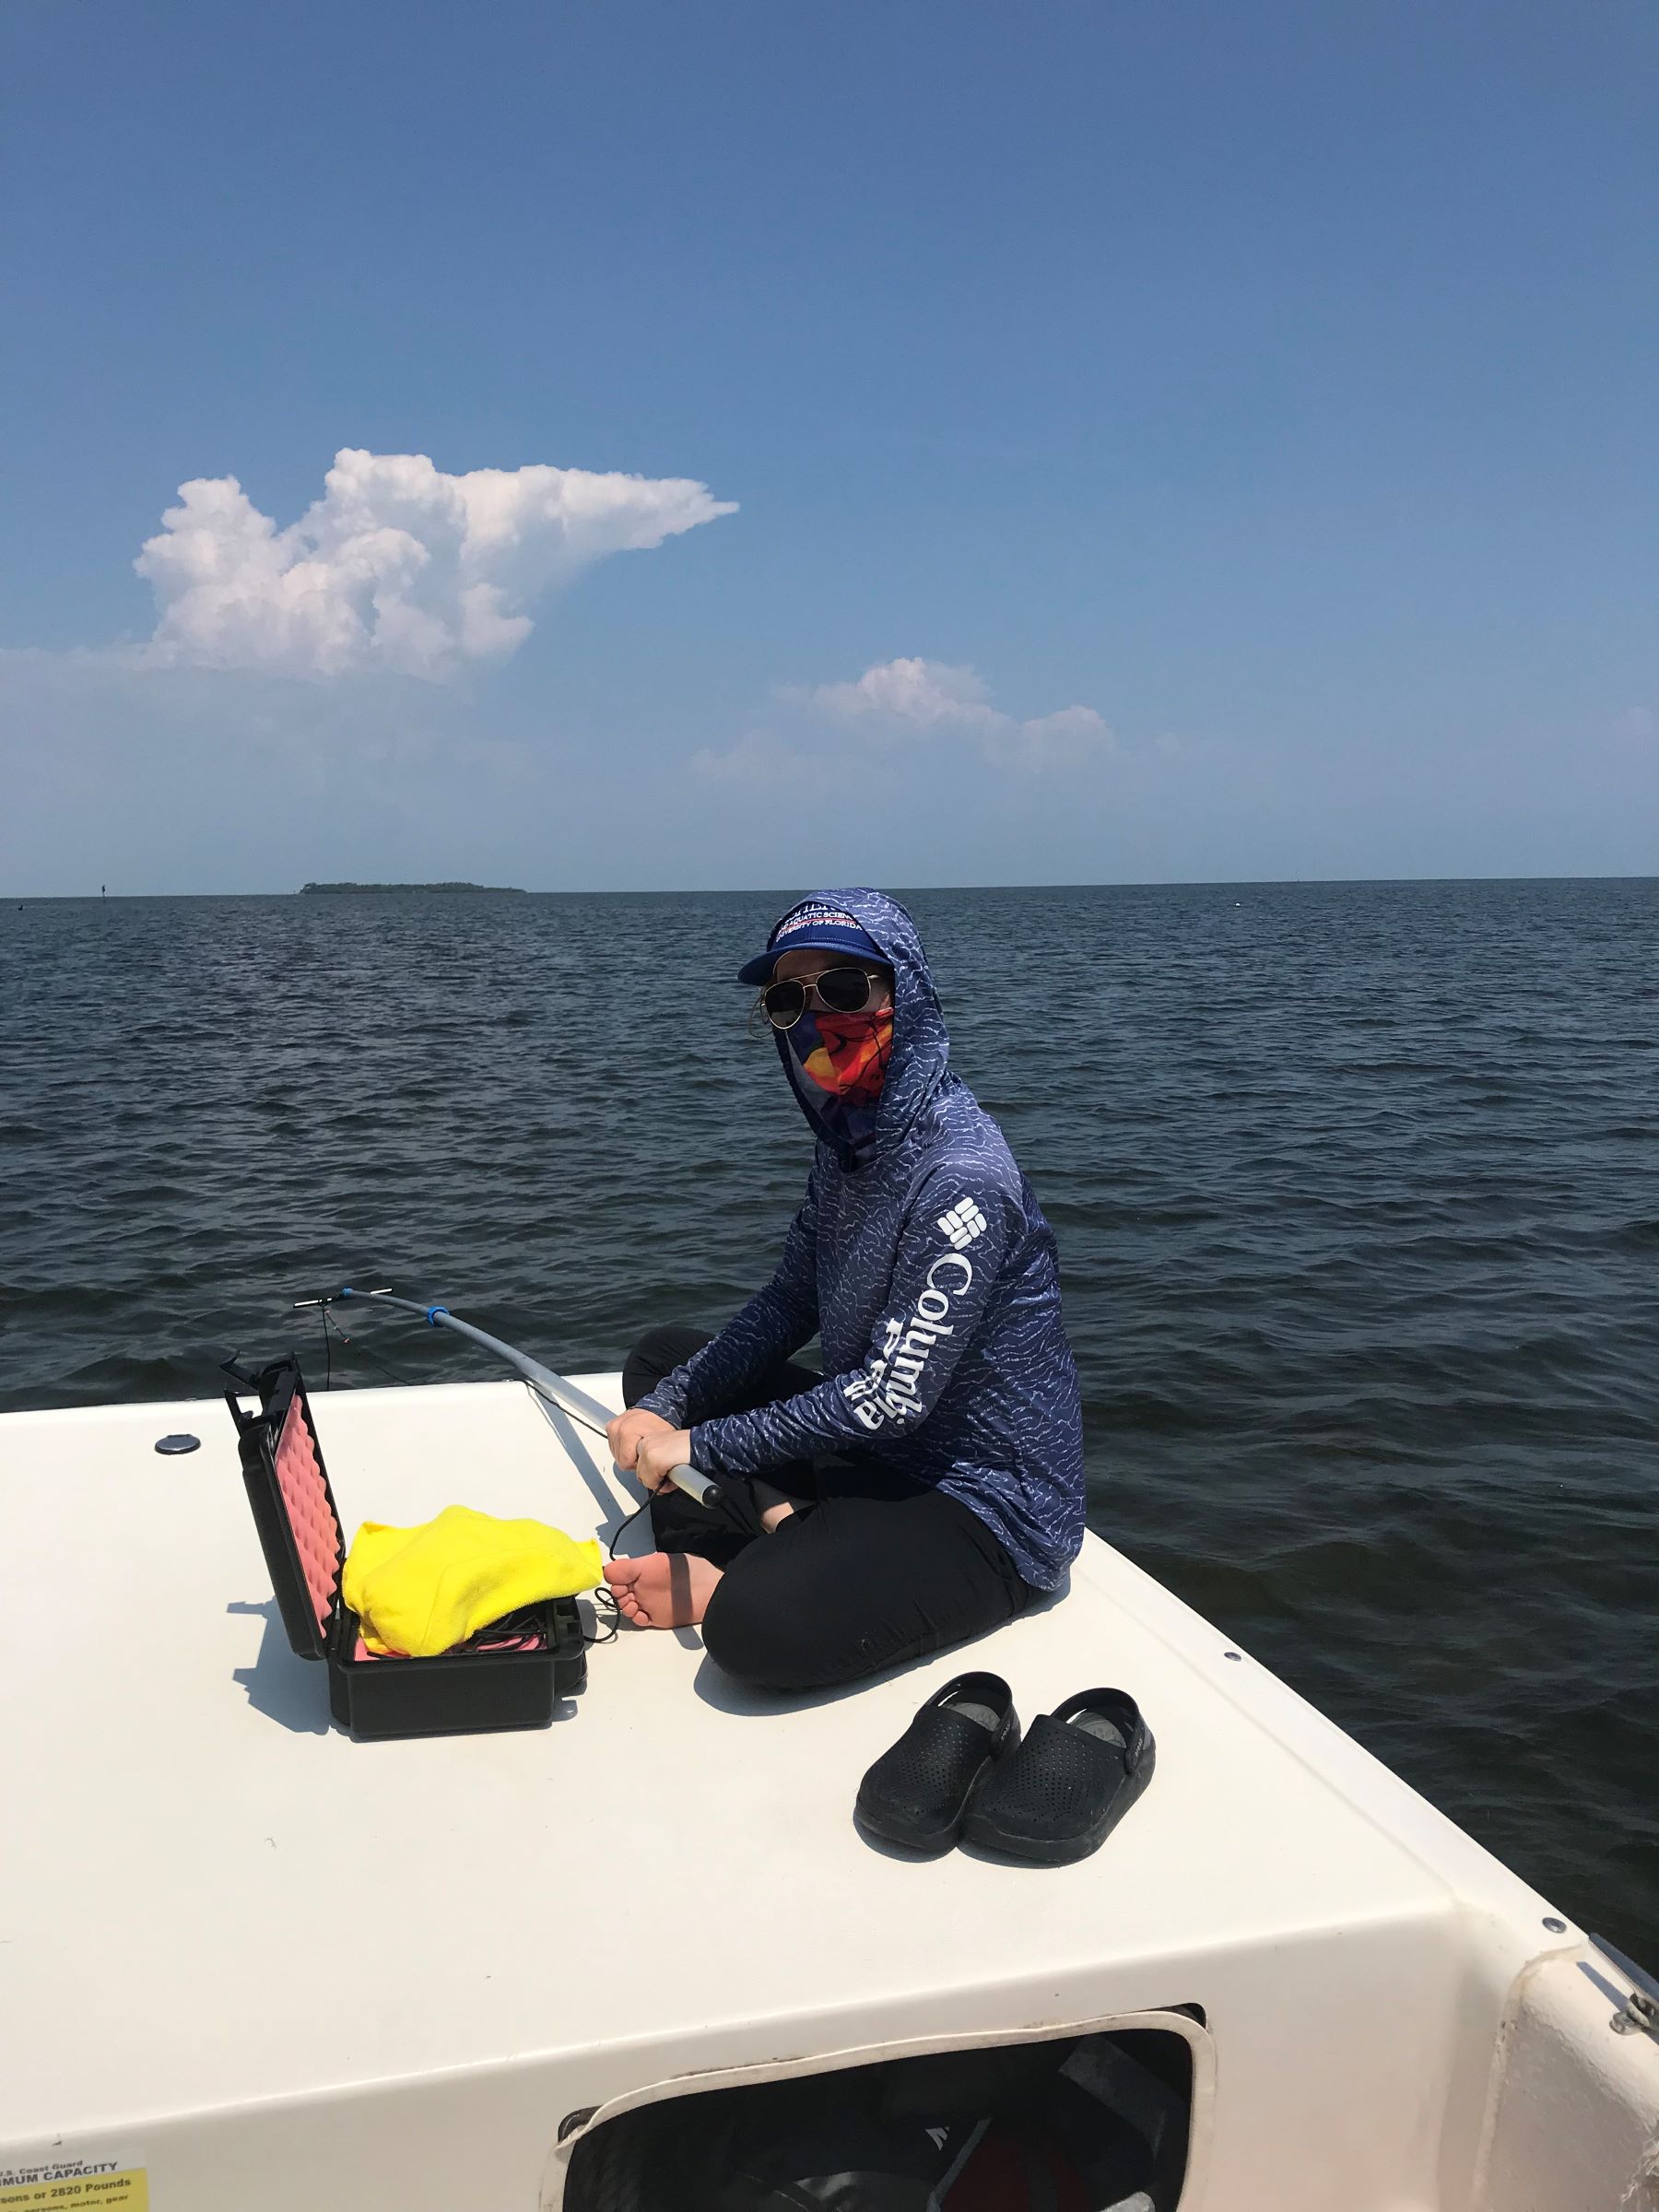 scientist on boat in ocean with sound equipment